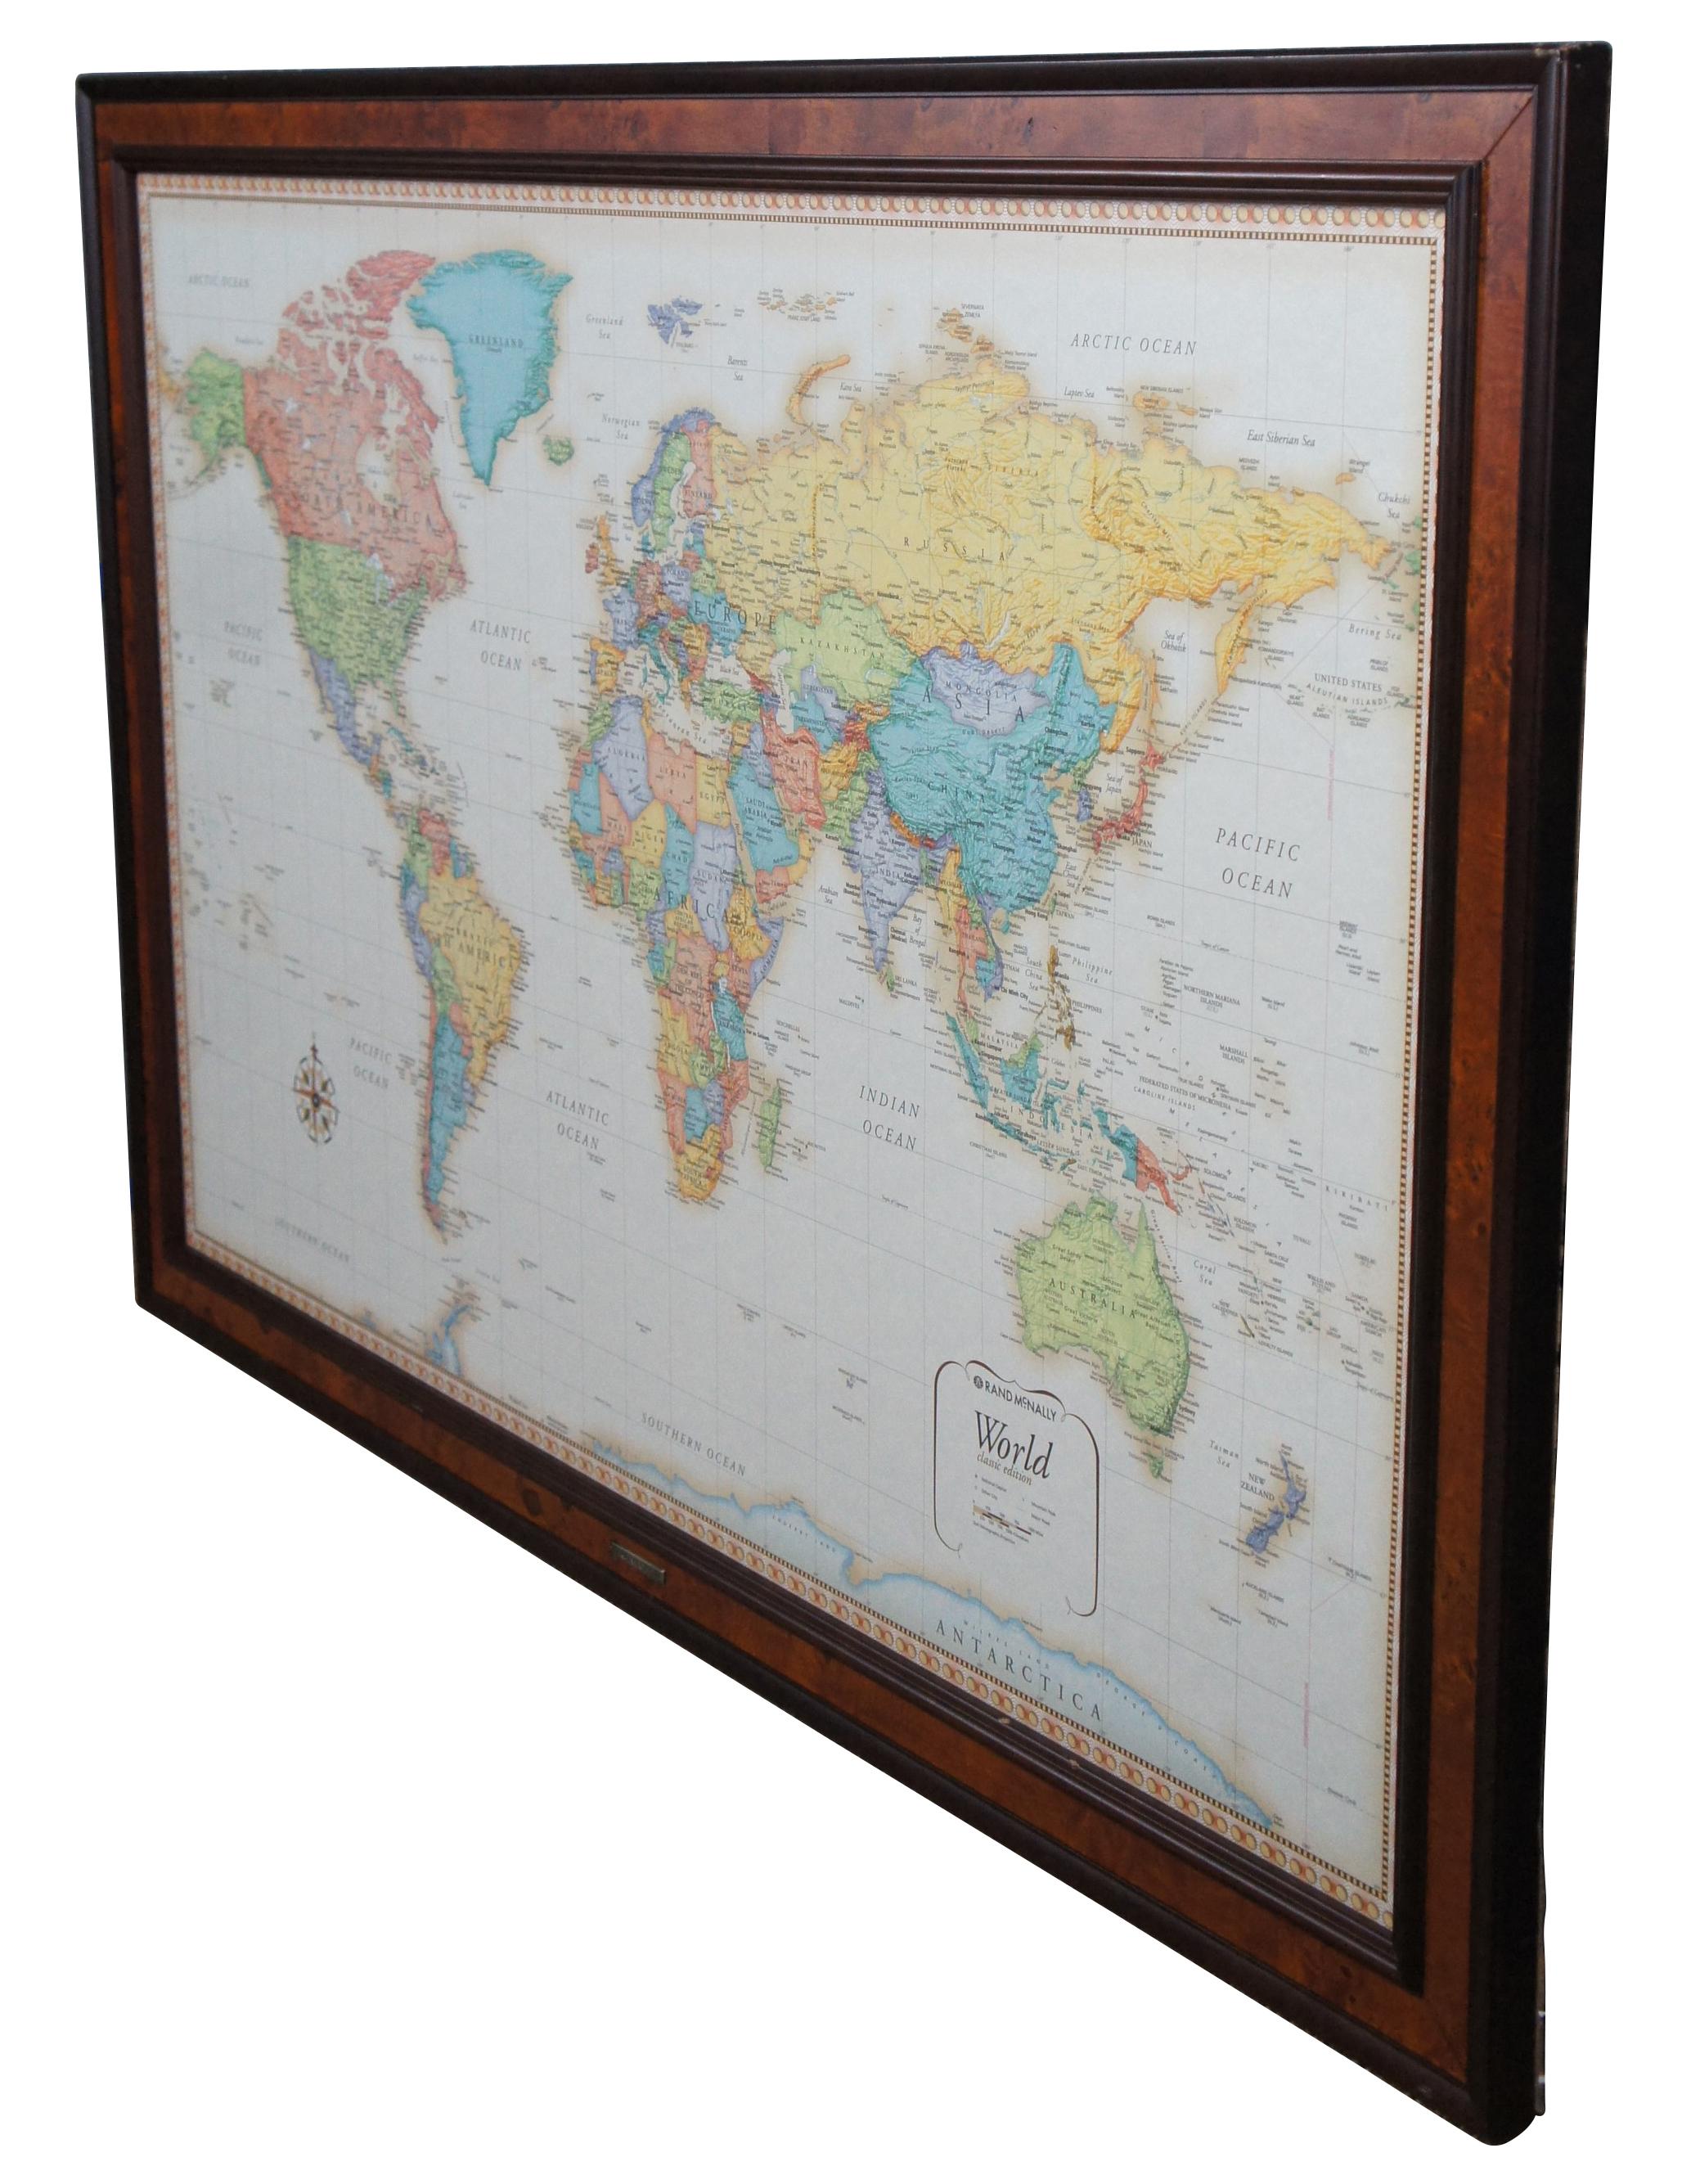 Modern Frontgate Rand McNally World Classic Magnetic Travel Map with Burlwood Frame